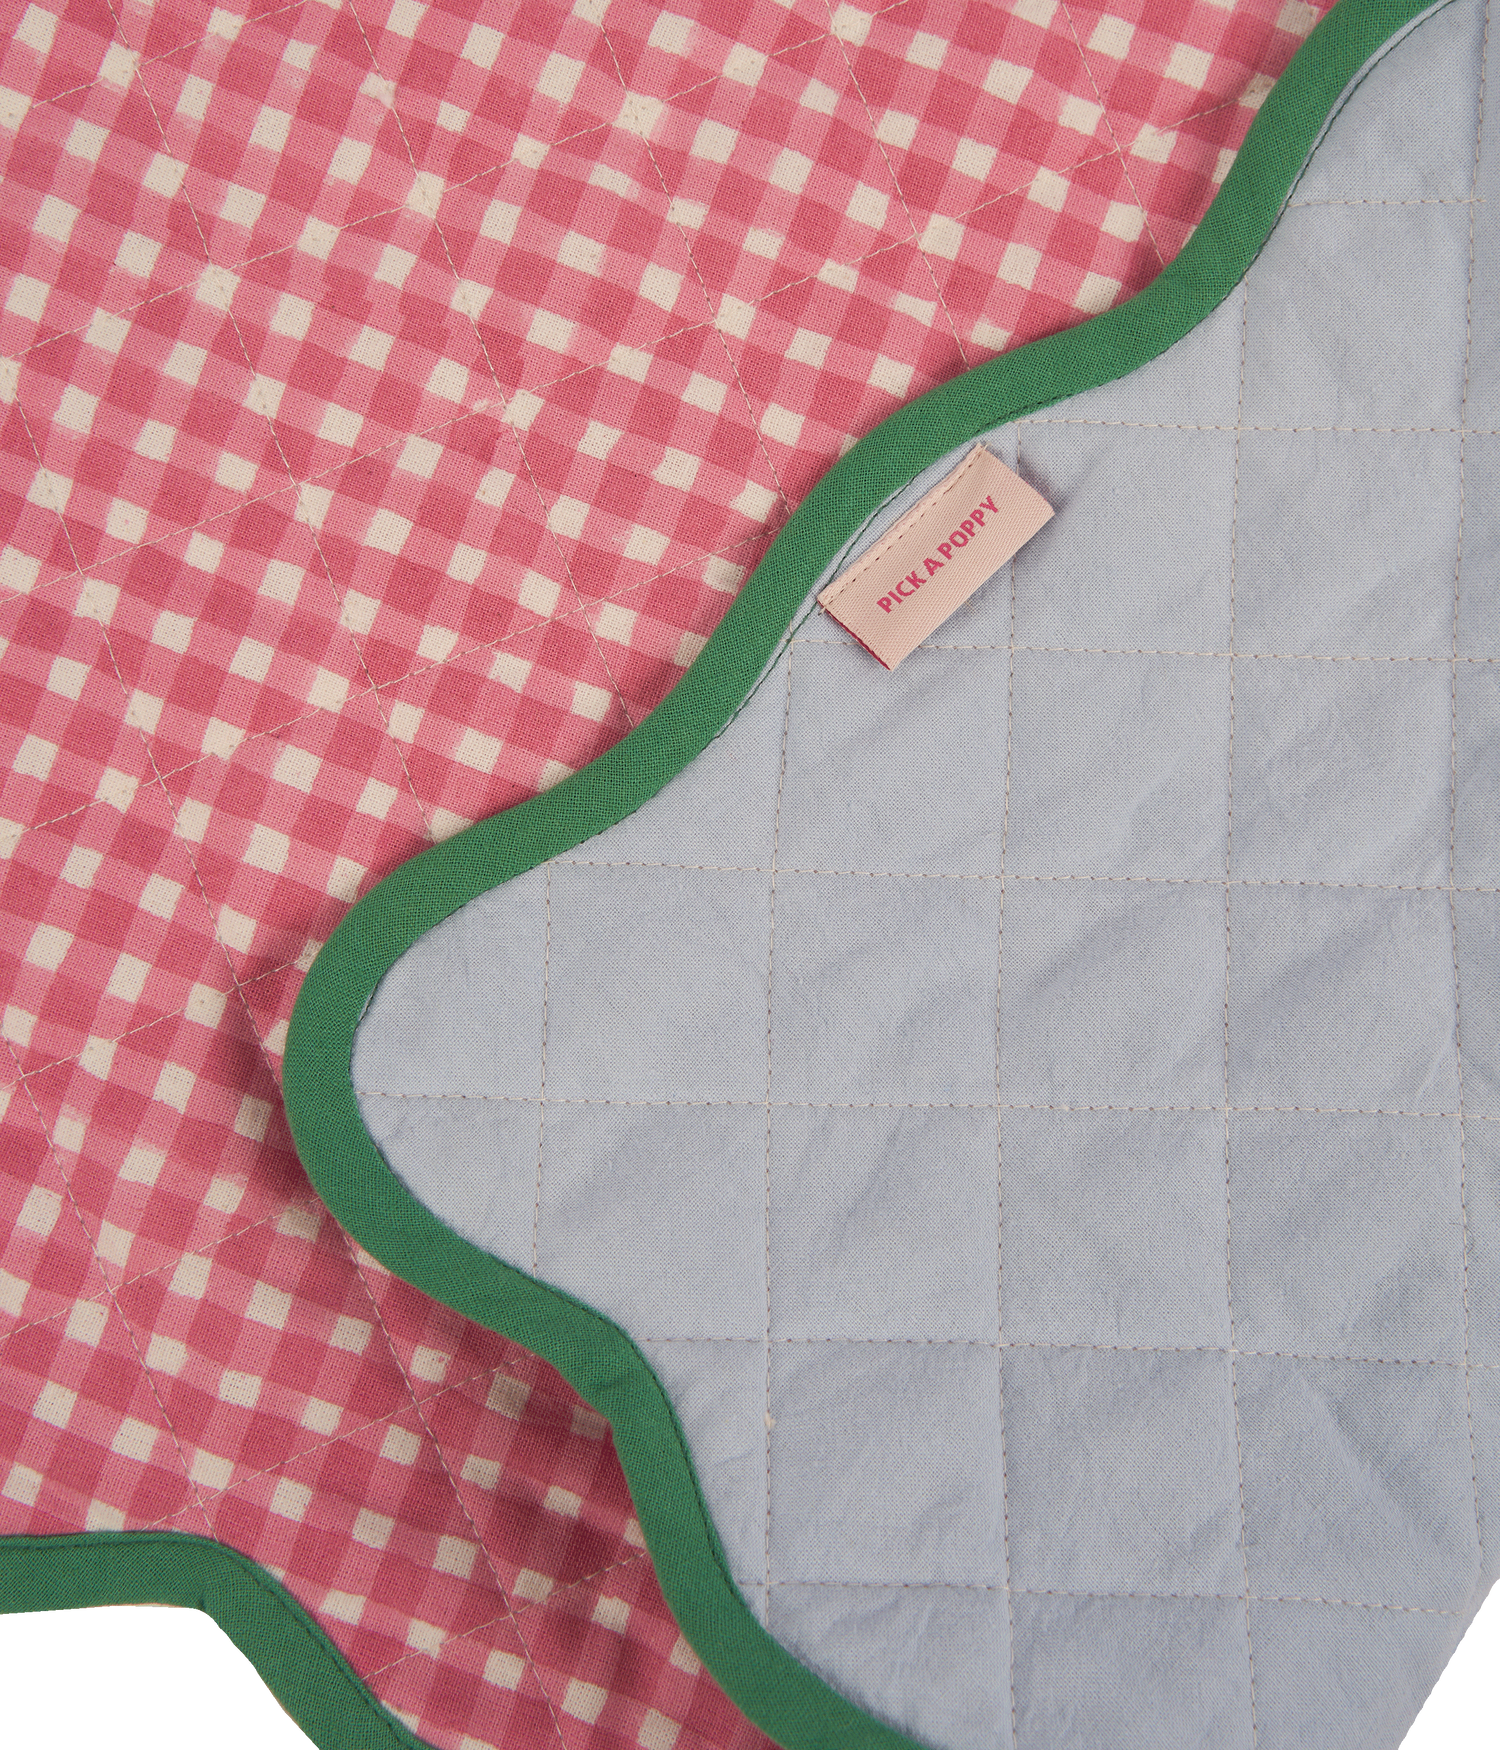 Scallop quilted placemat - Dark pink 34x48 cm